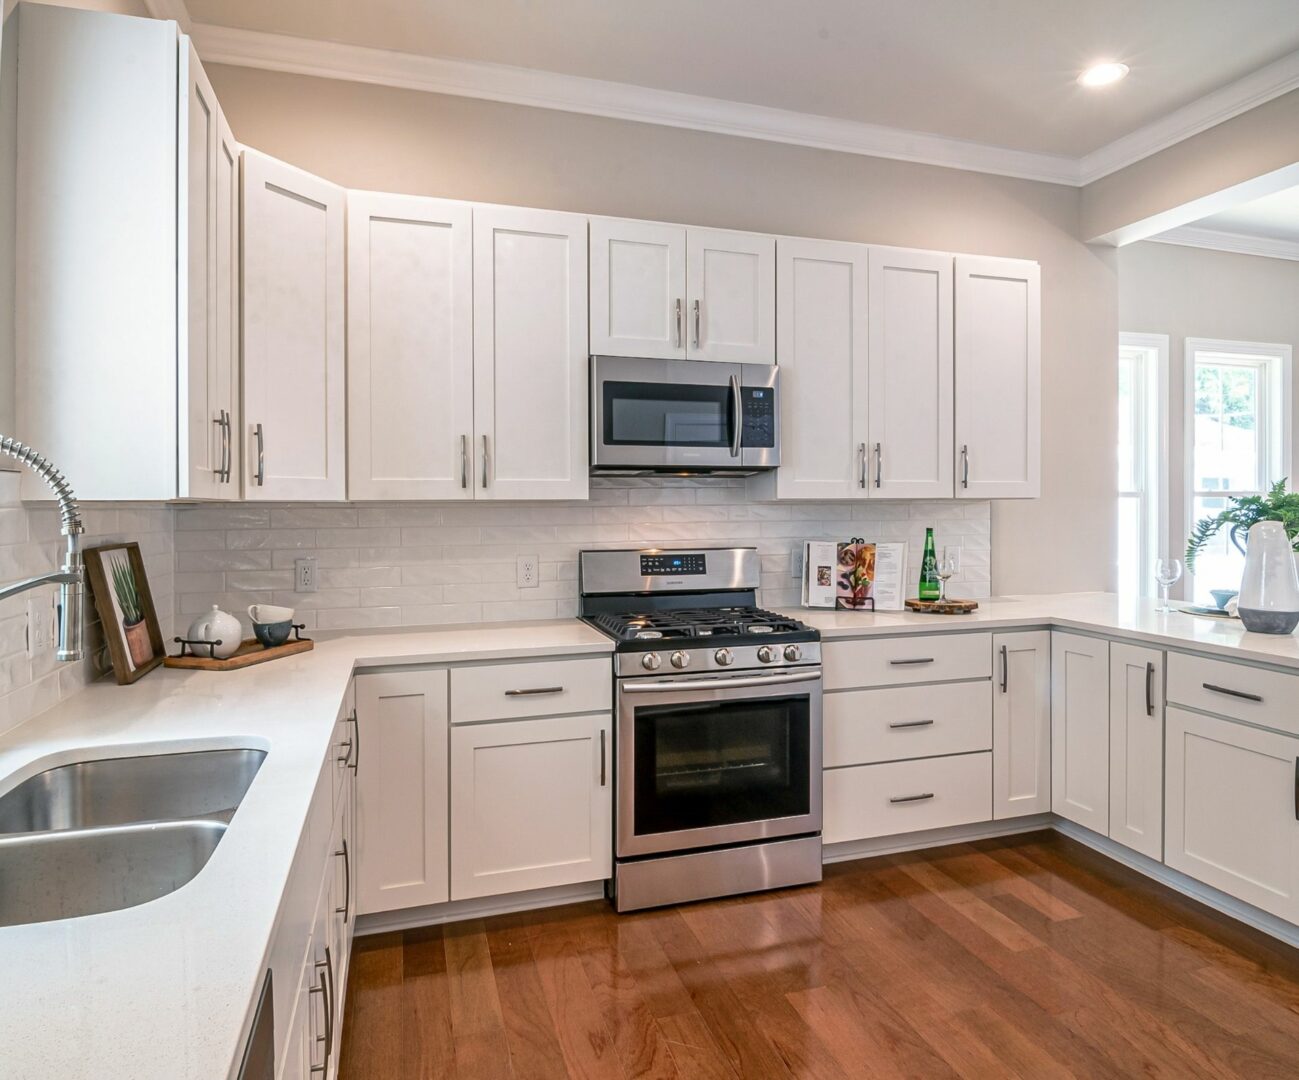 A remodeled kitchen in San Jose with beautiful cabinets